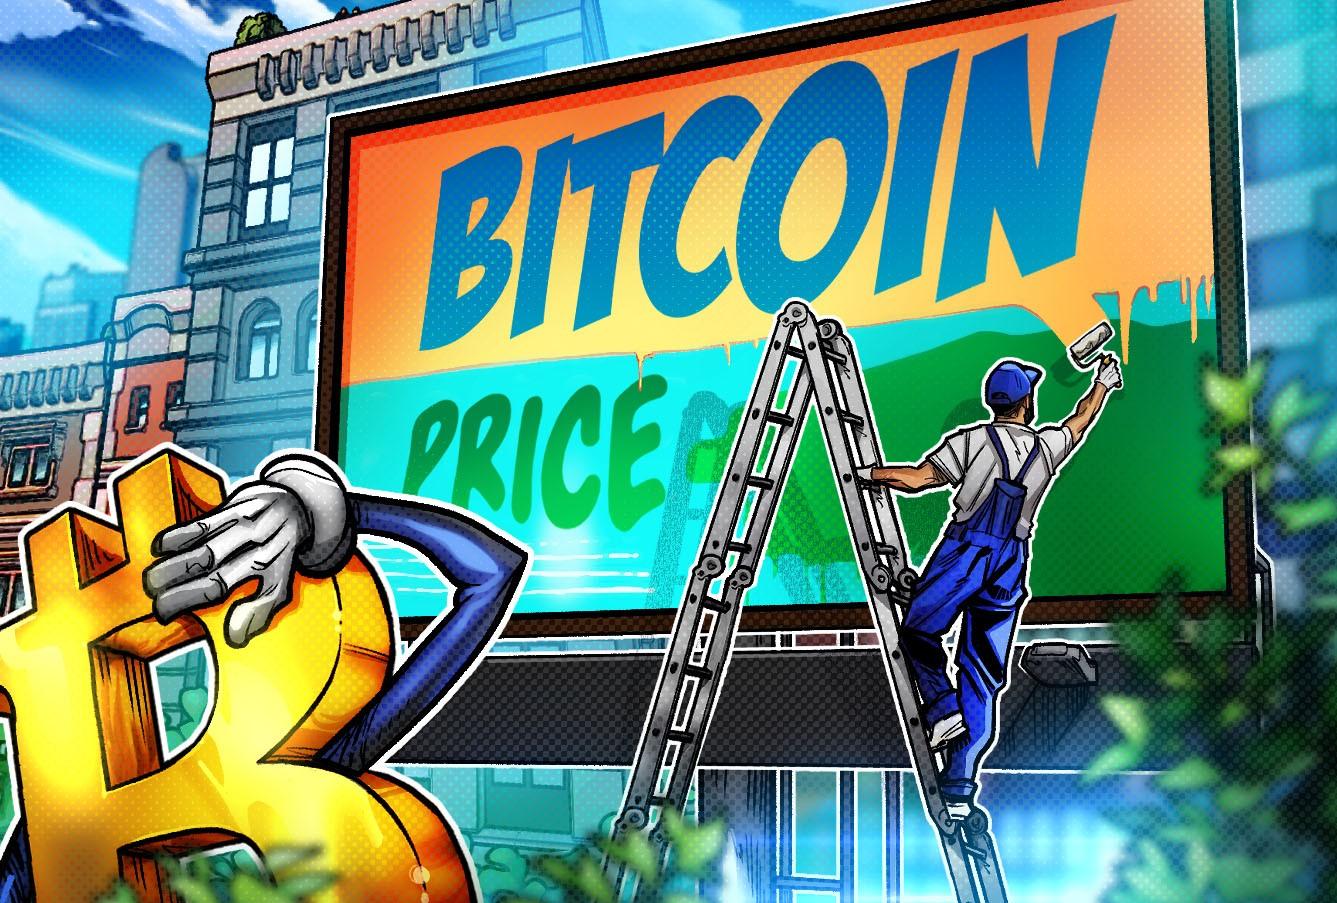 bitcoin-co-the-dat-dinh-moi-neu-ty-le-that-nghiep-va-lam-phat-tai-my-giam-cham